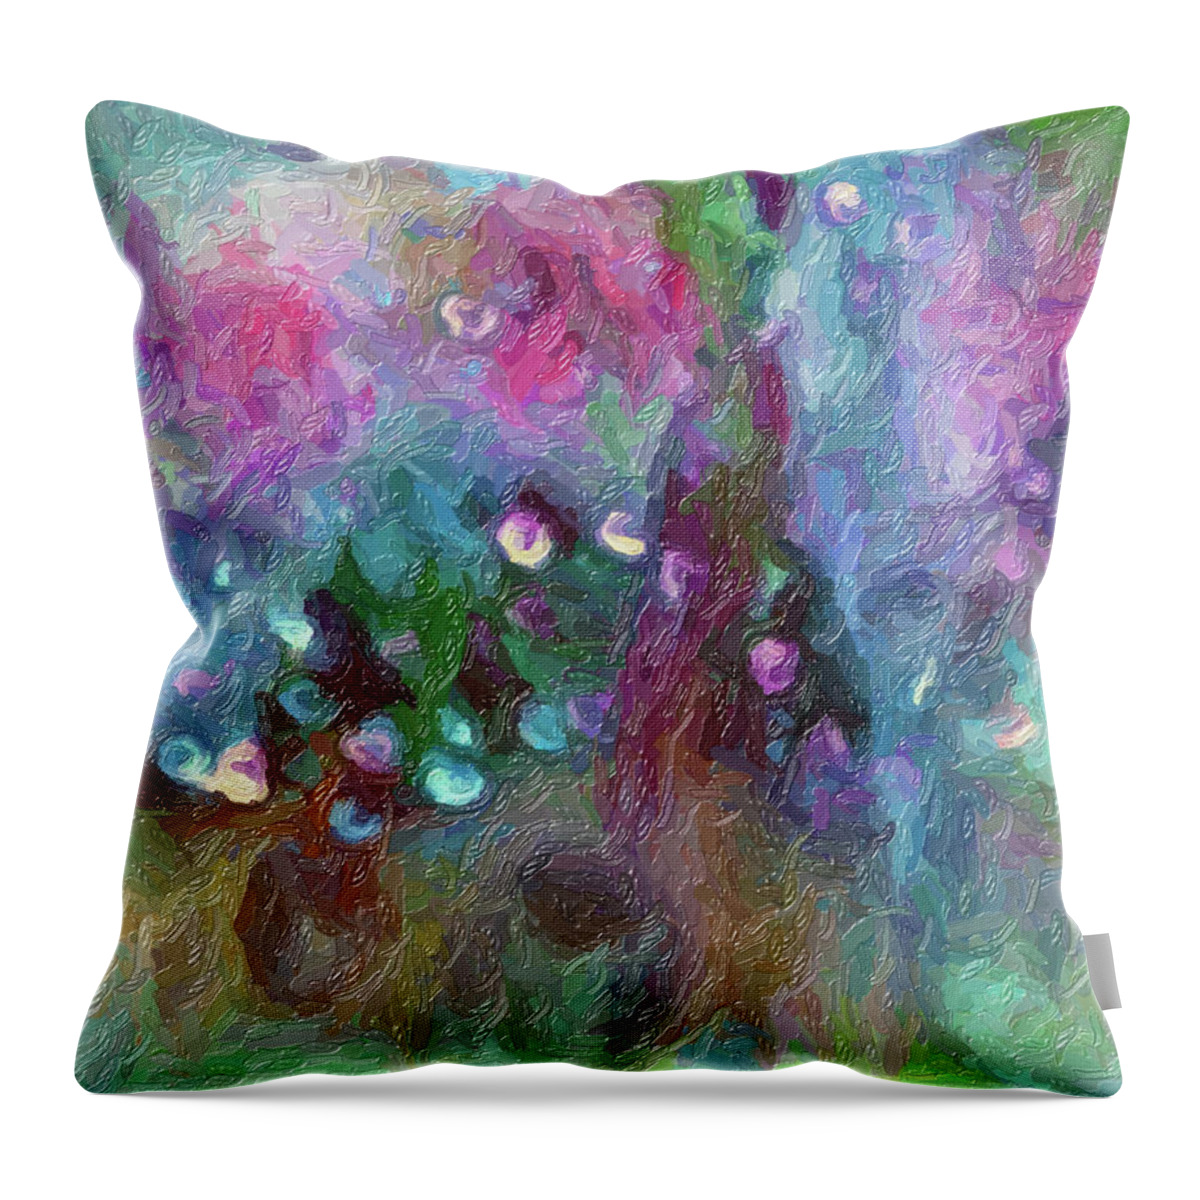 Colors Lavender Throw Pillow featuring the digital art Sensations II by Don Wright